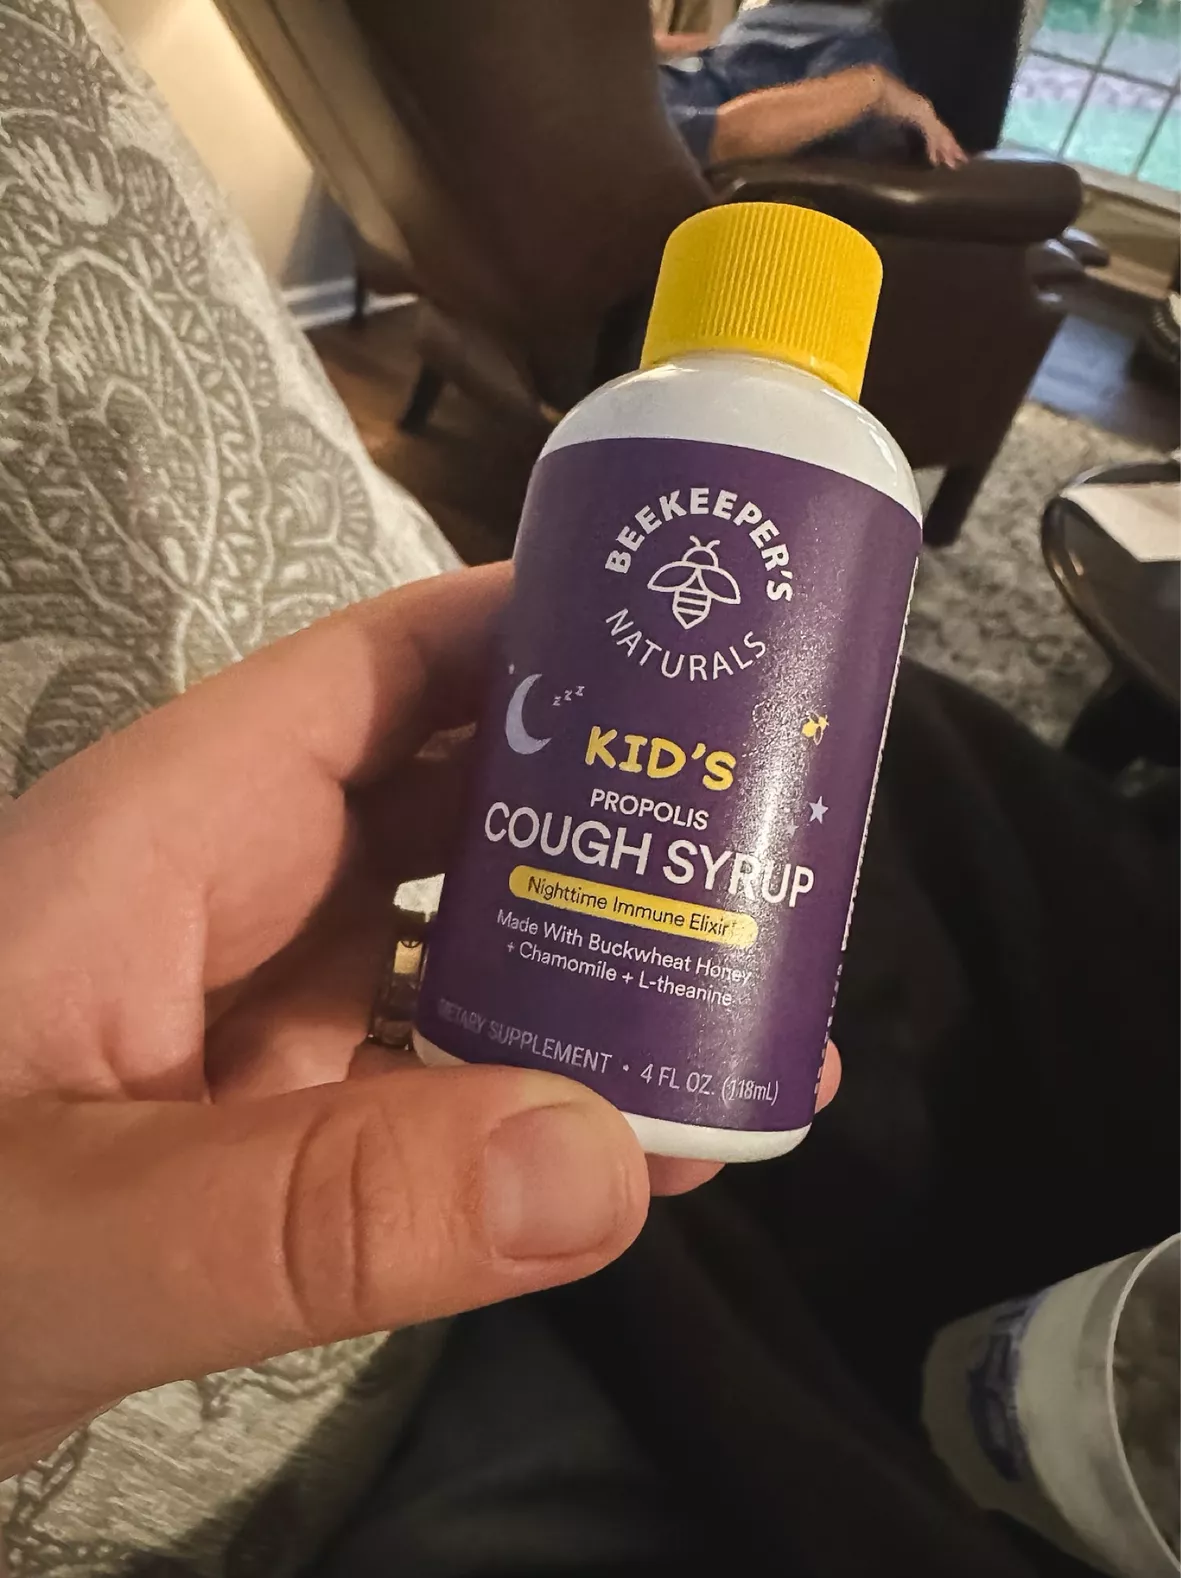 Beekeepers Naturals Kids Nighttime Propolis Cough Syrup - 4 fl oz